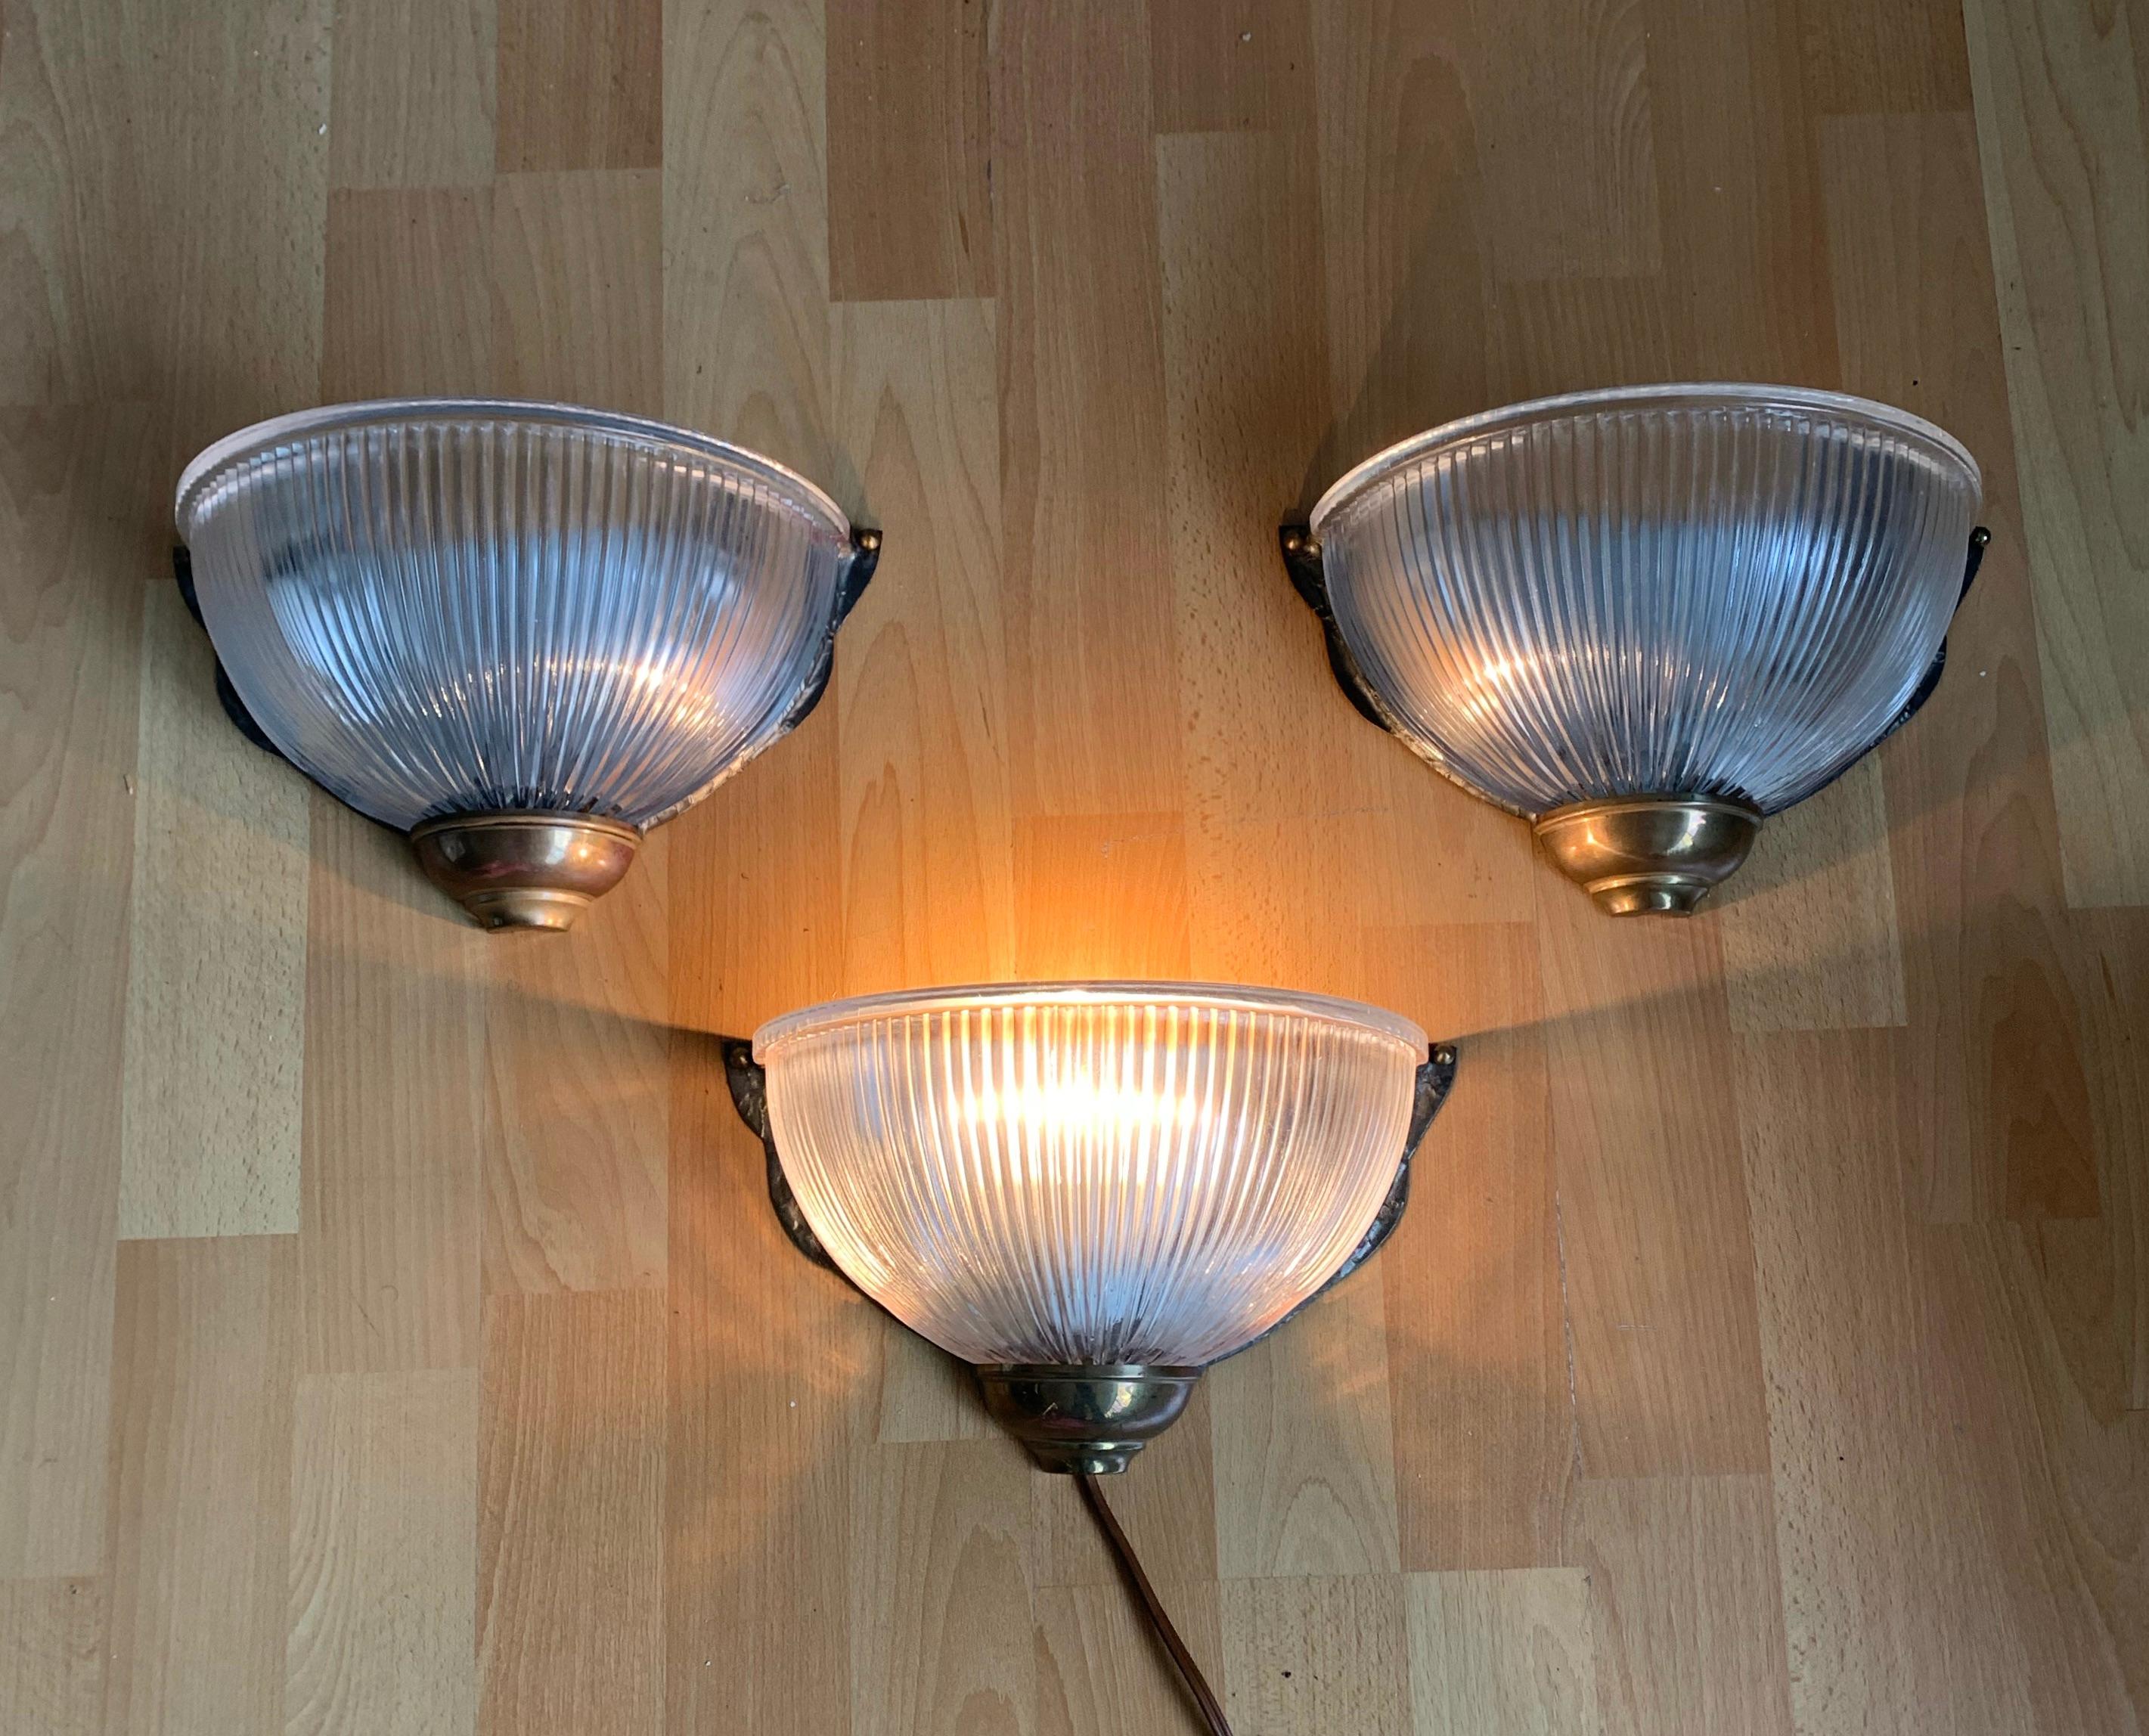 Wonderful looking and easy to mount set of three prismatic glass wall sconces.

Finding the right wall lights for a Mid-Century Modern or for an Industrial style interior can be a Challenge. That is exactly why we did not think twice when we first